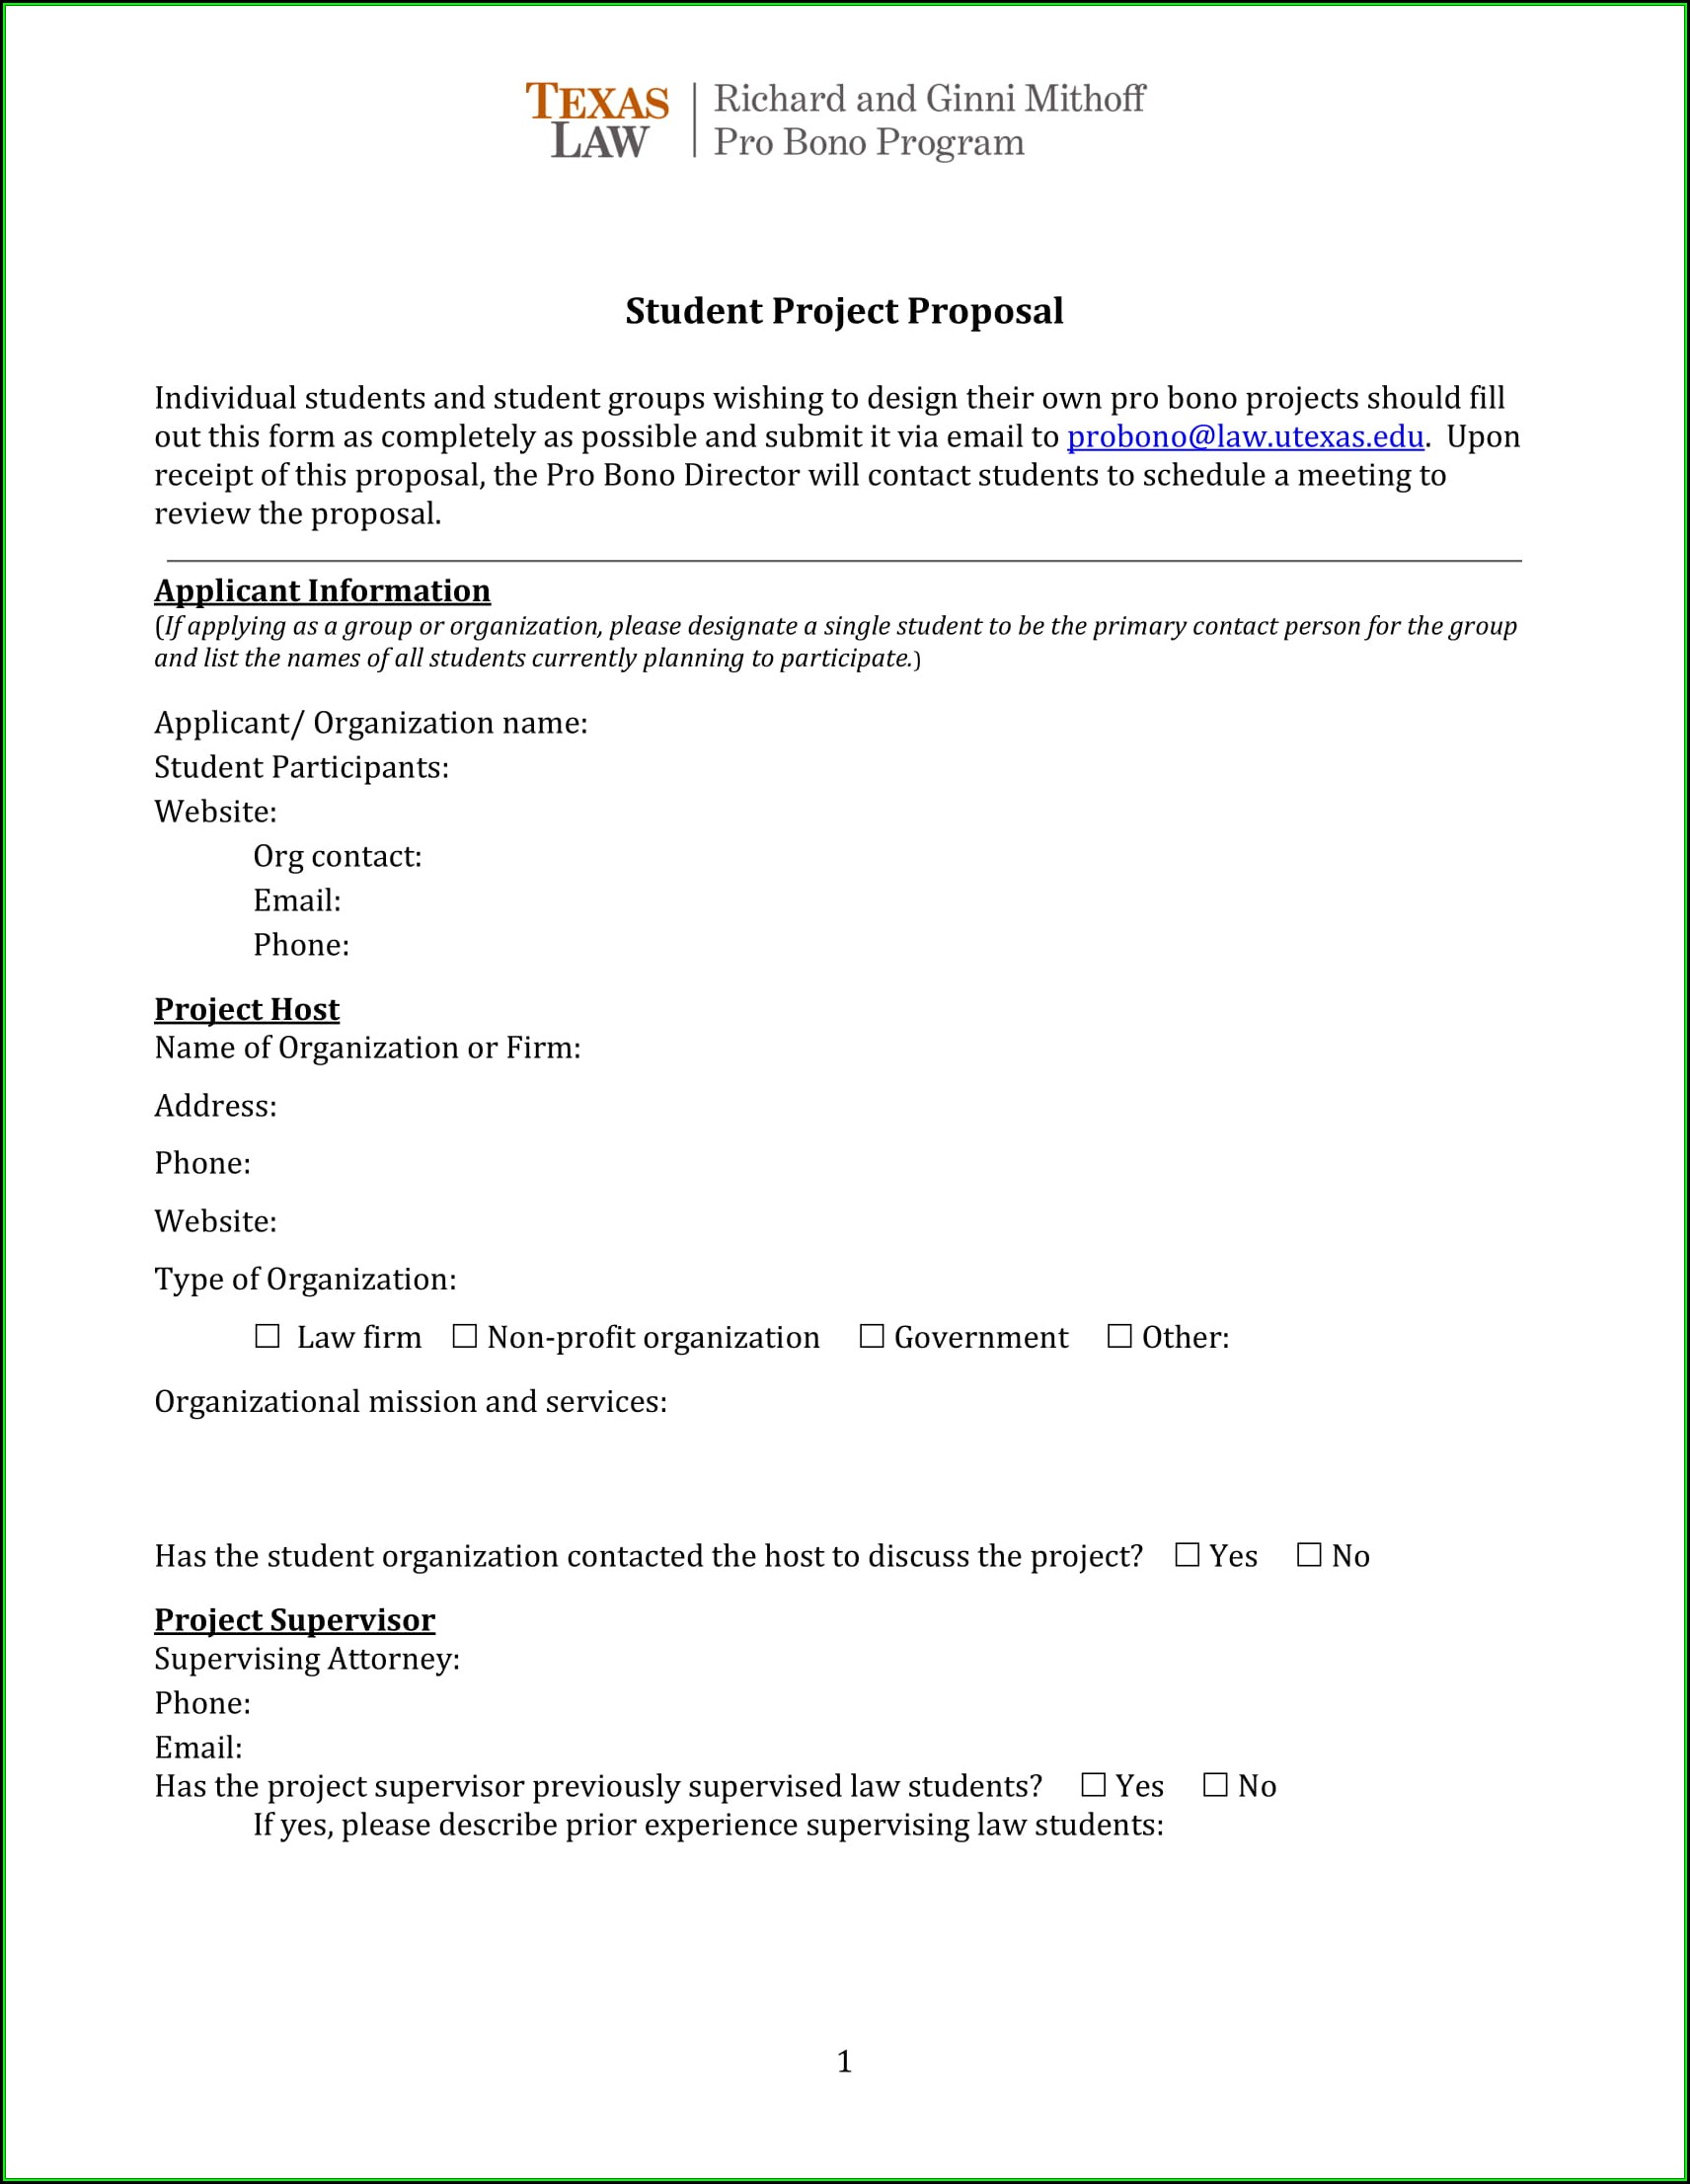 Business Proposal Template Pdf South Africa